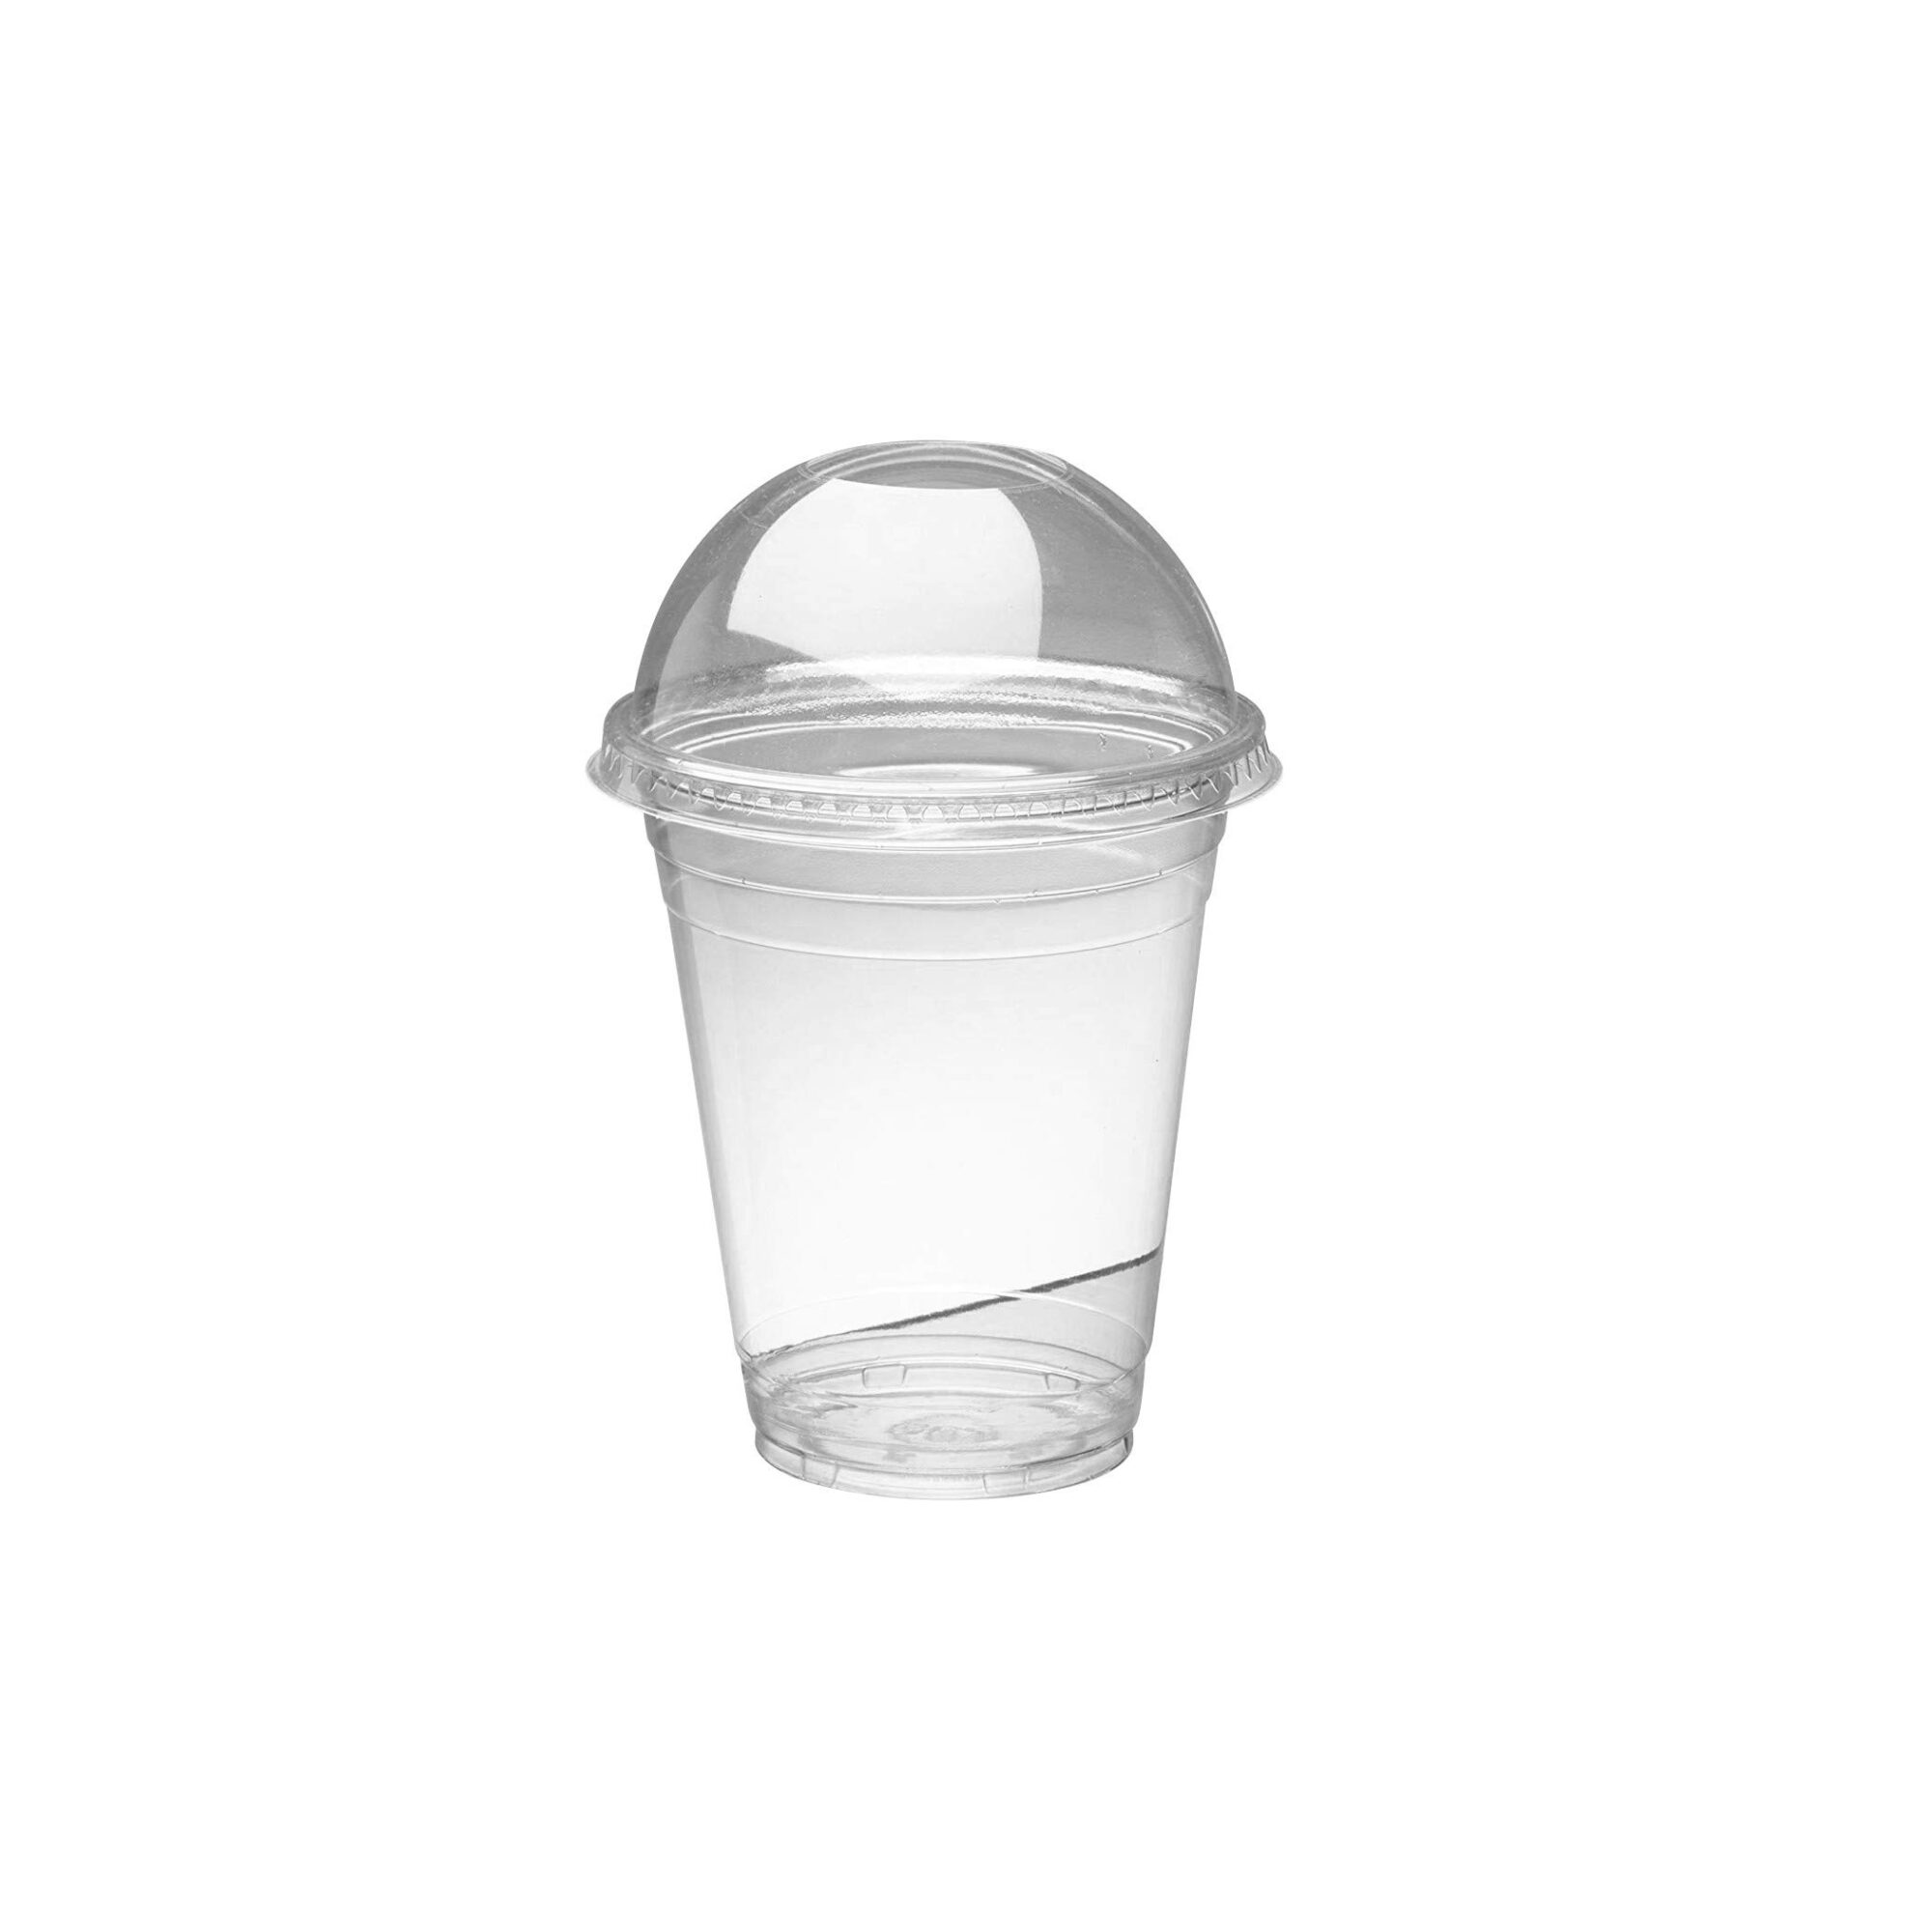 CUCUMI 4pcs 16oz Glass Juice Bottles with Lids, Reusable Juice Containers  Drinking Jars Water Cups w…See more CUCUMI 4pcs 16oz Glass Juice Bottles